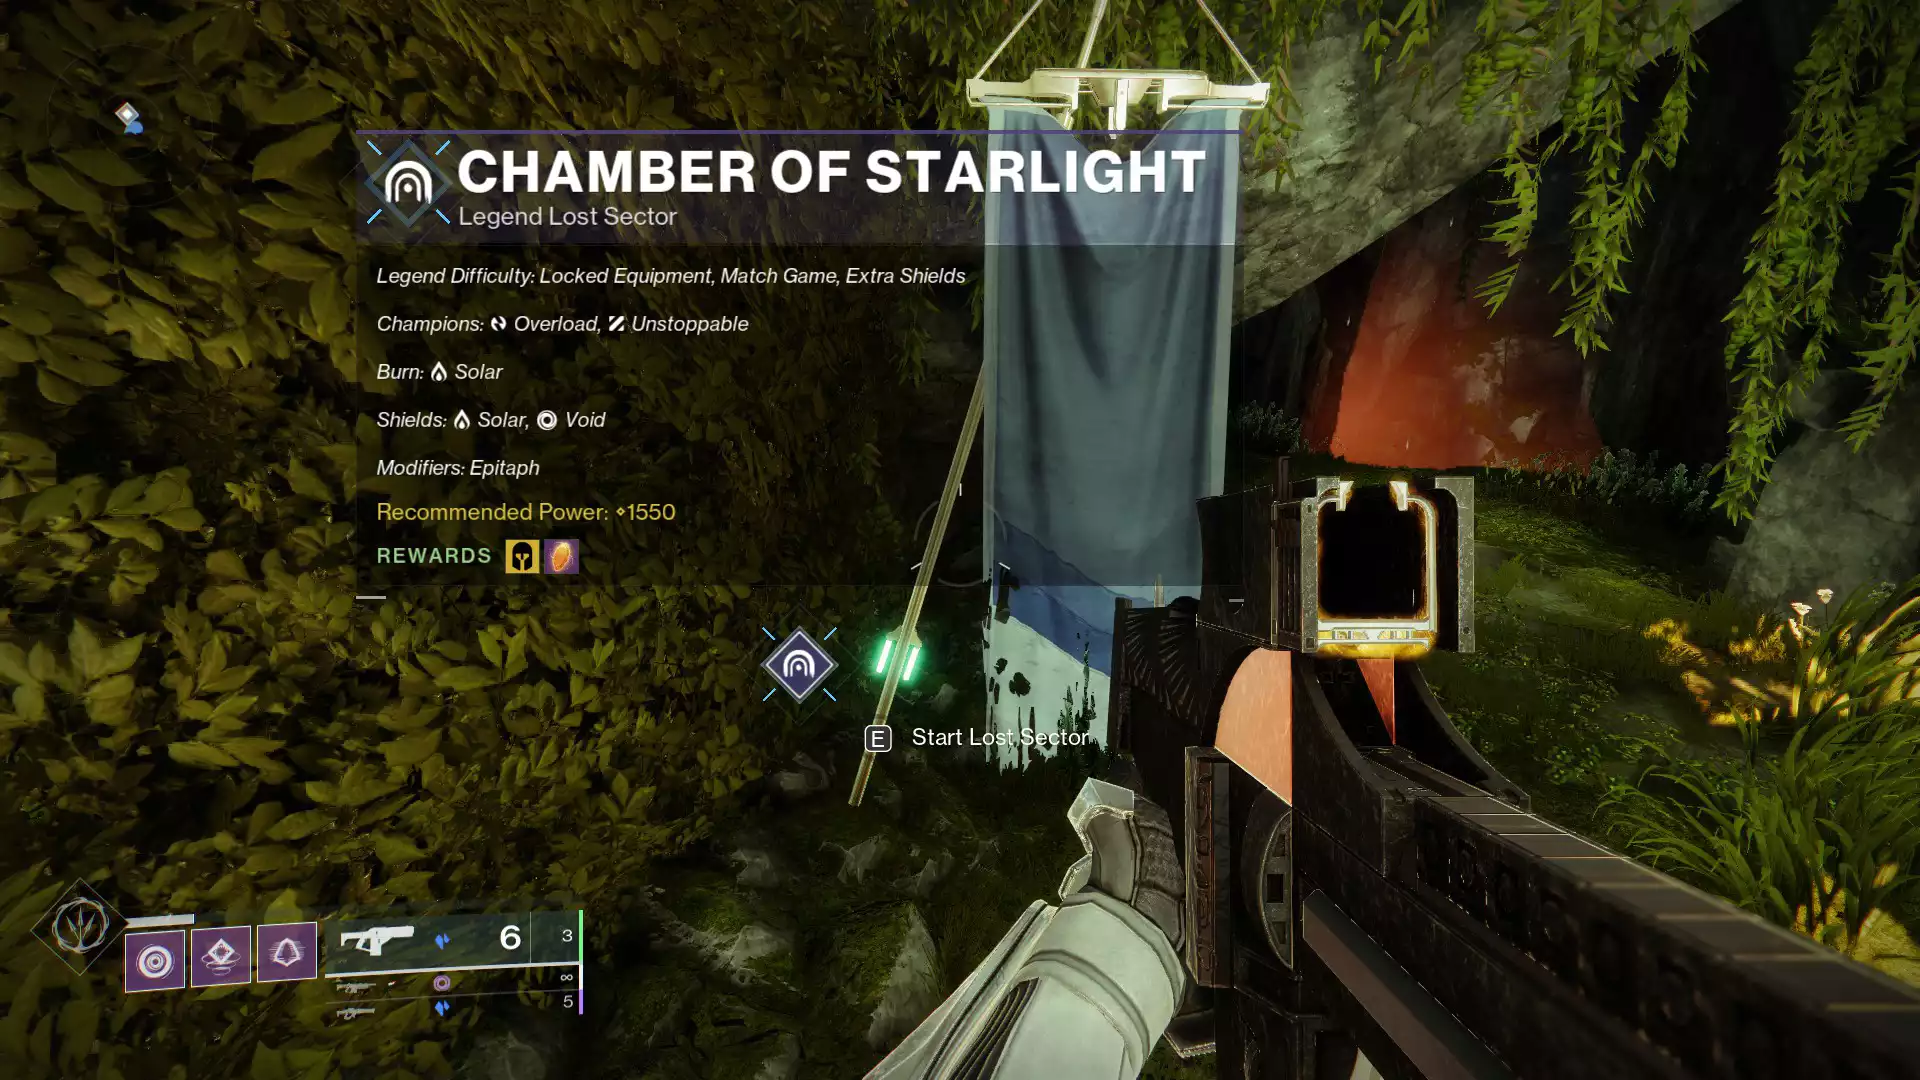 Destiny 2 Chamber of Starlight: How To Complete The Master/Legend Lost Sector